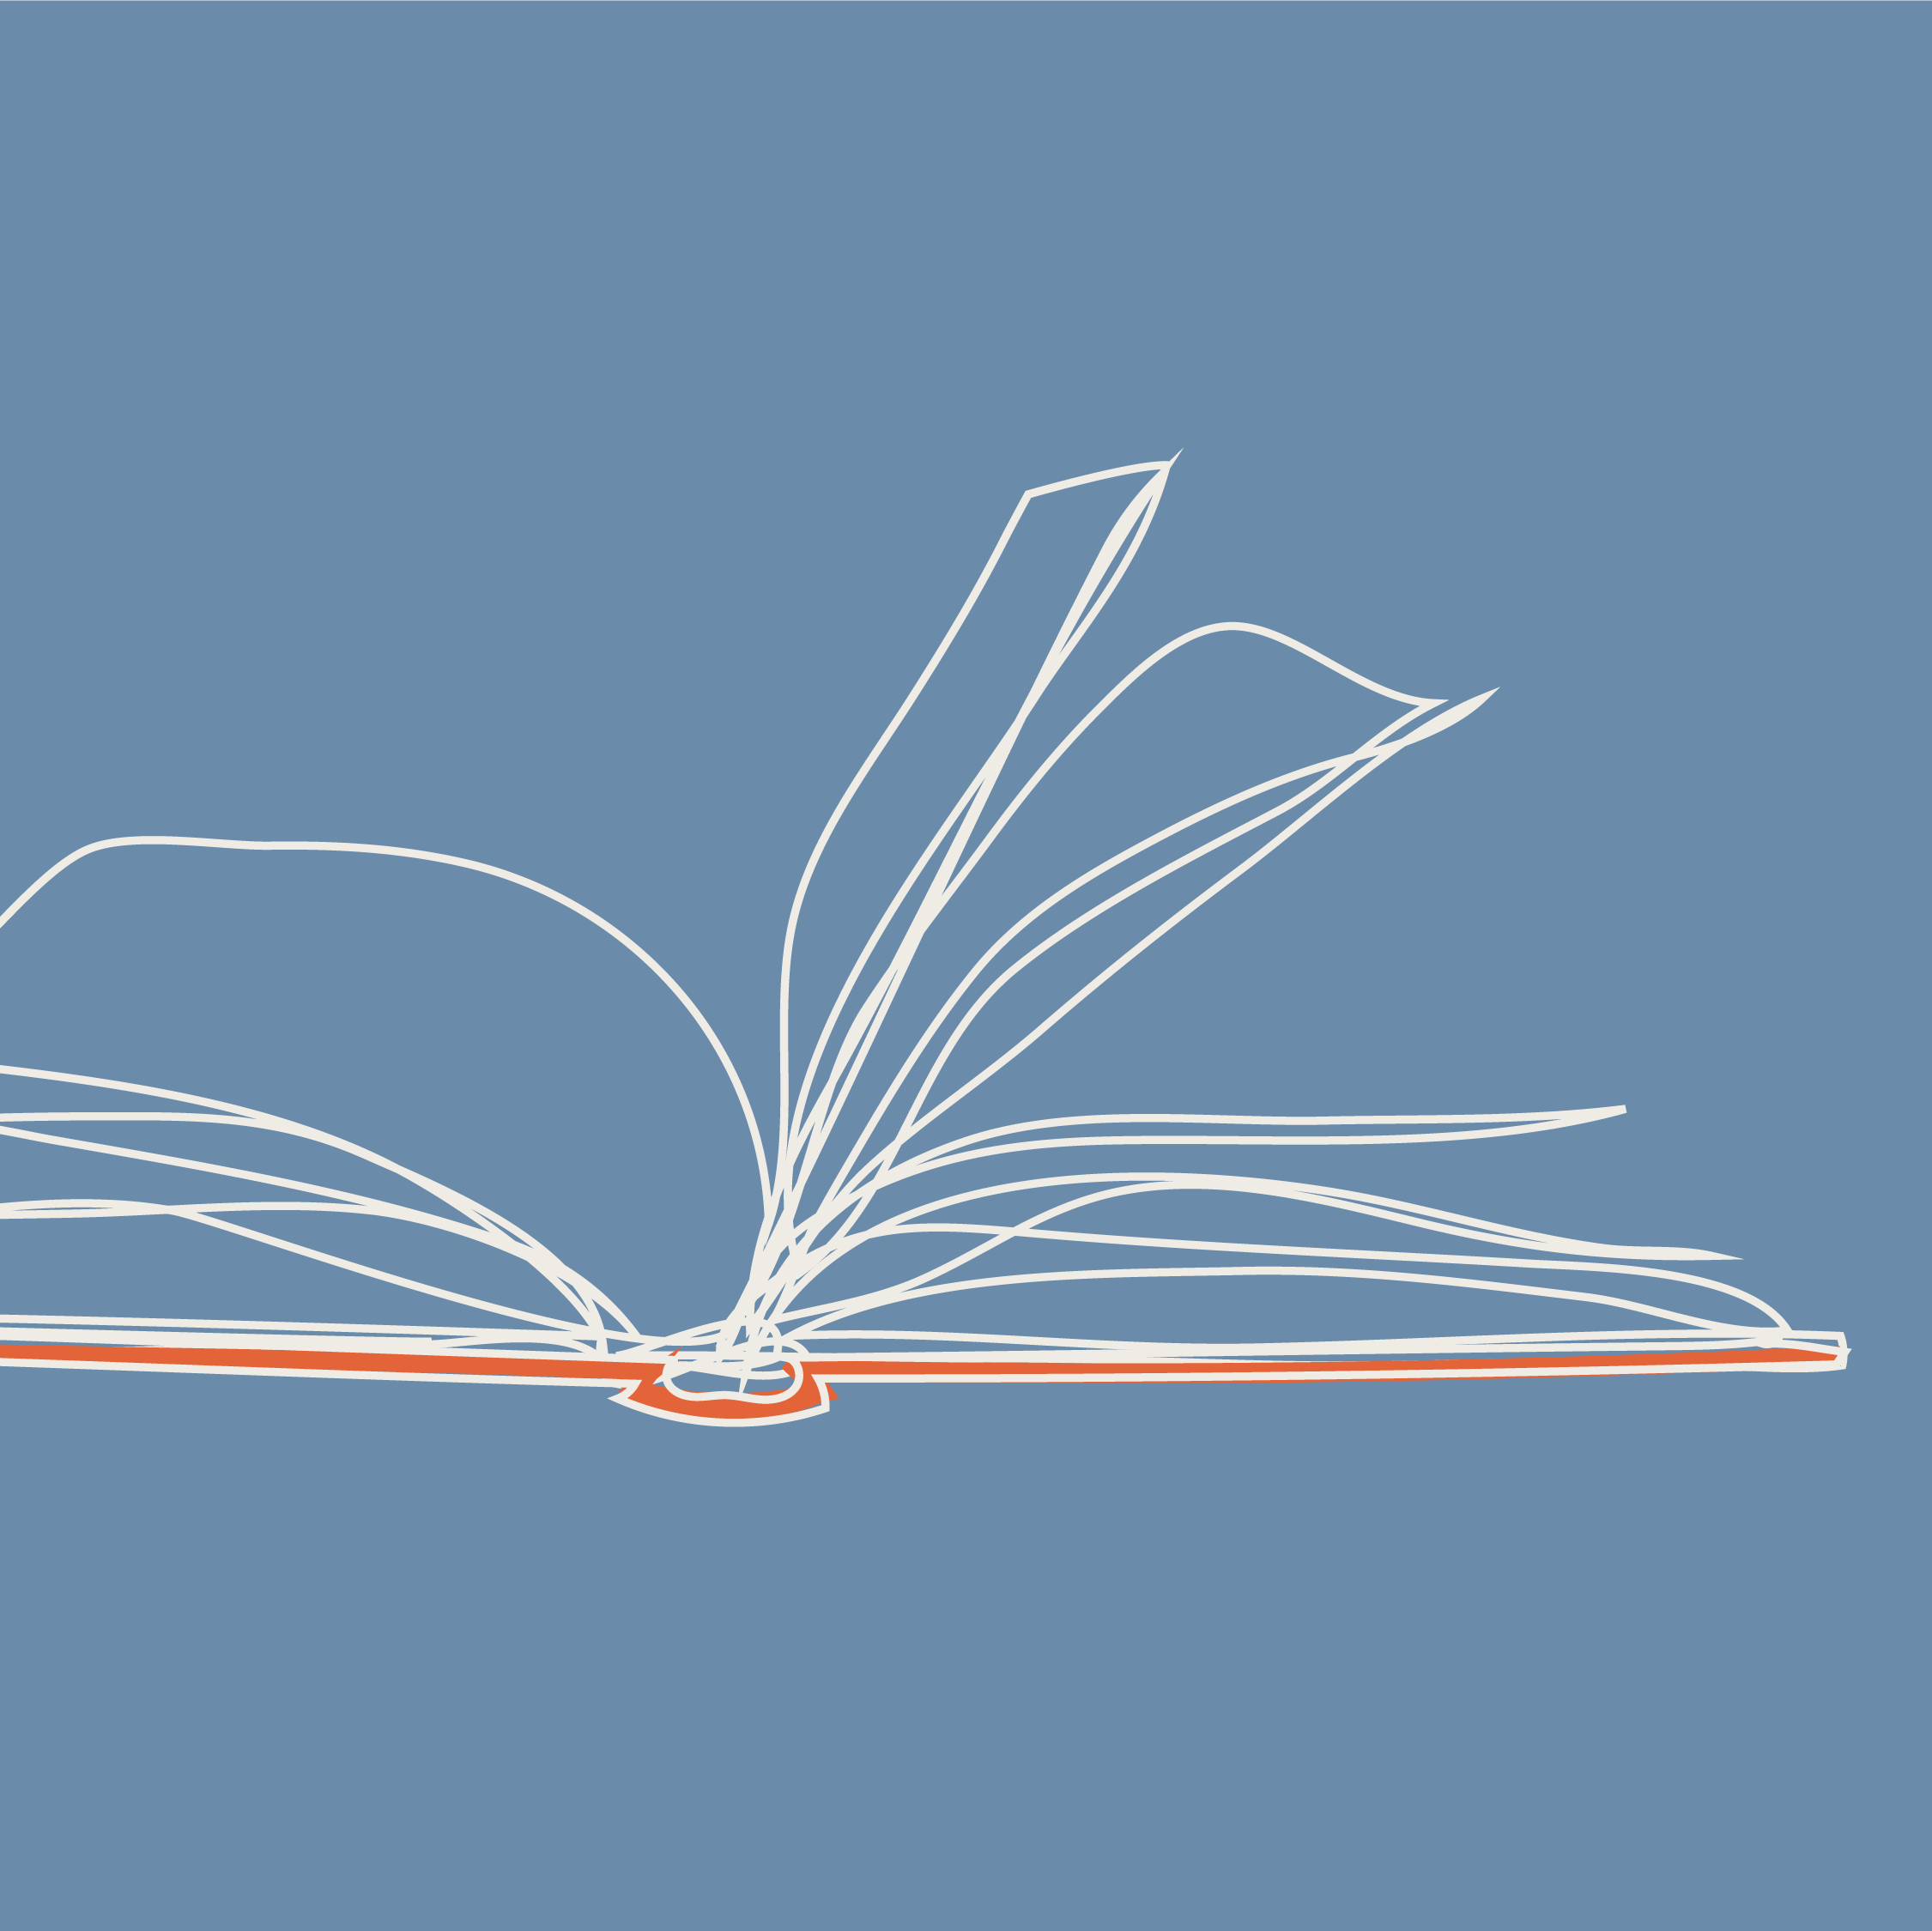 a line illustration of an open book